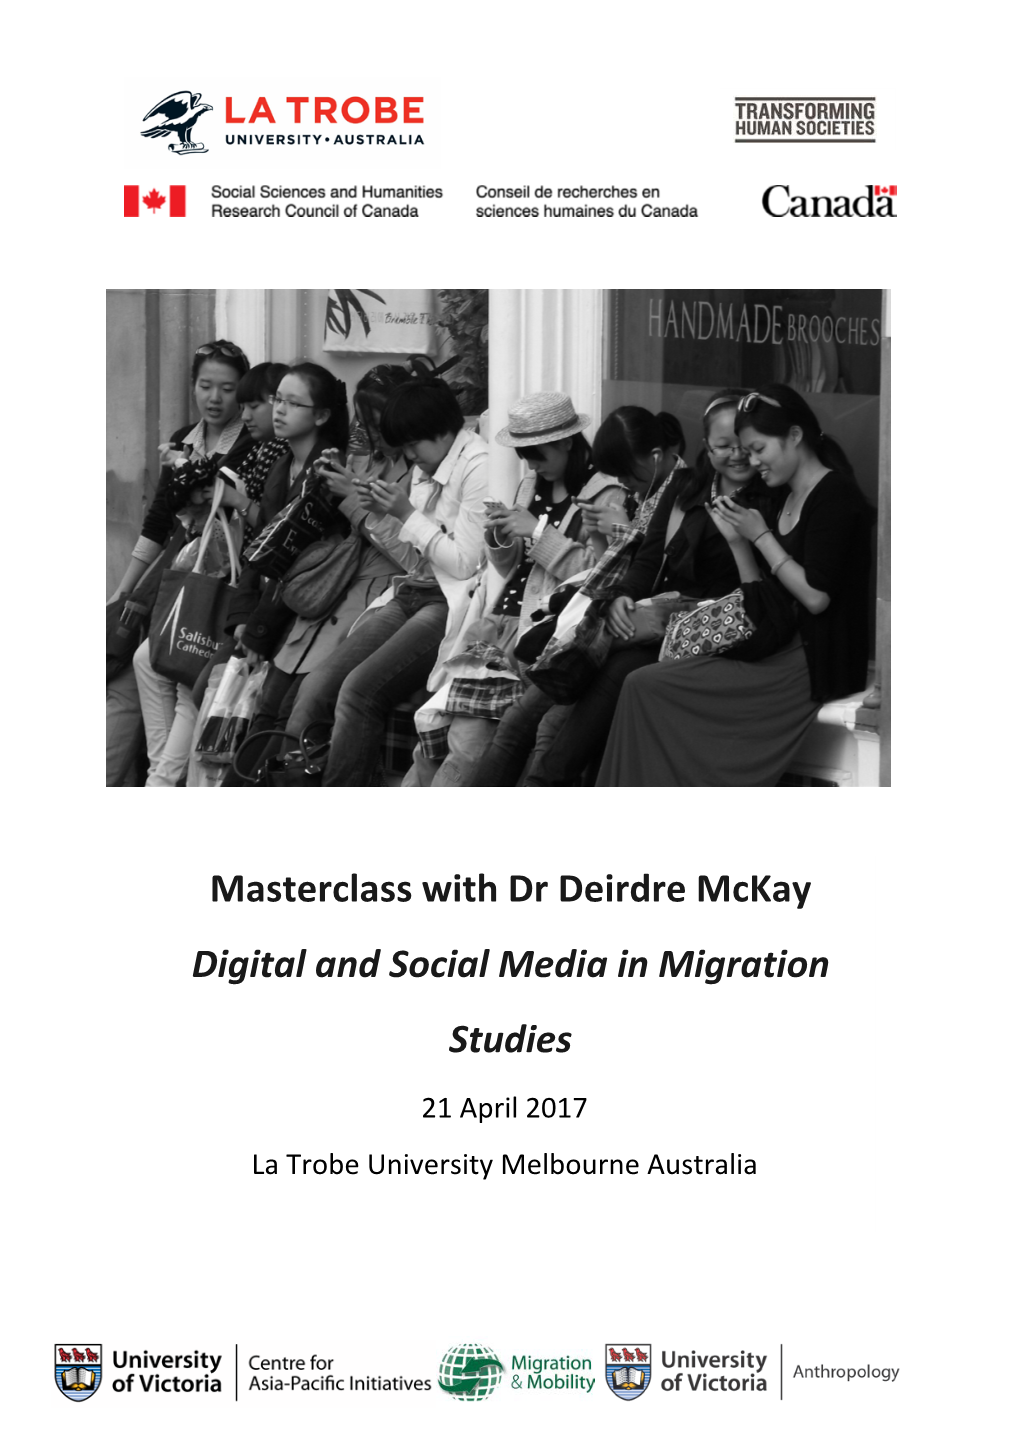 Masterclass with Dr Deirdre Mckay Digital and Social Media in Migration Studies